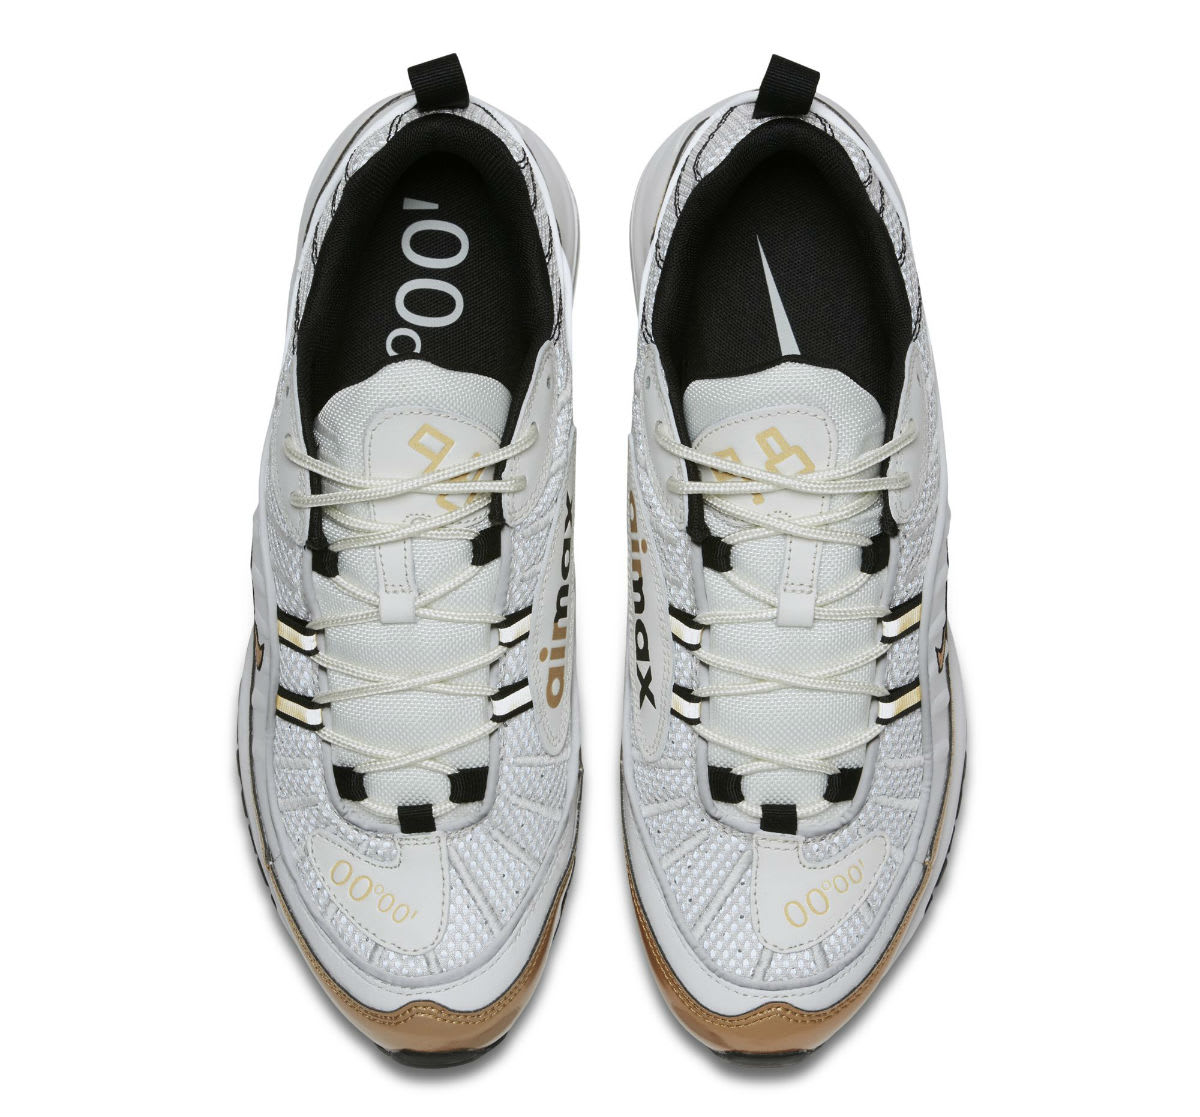 Nike Air Max 98 UK White Gold Release Date Top